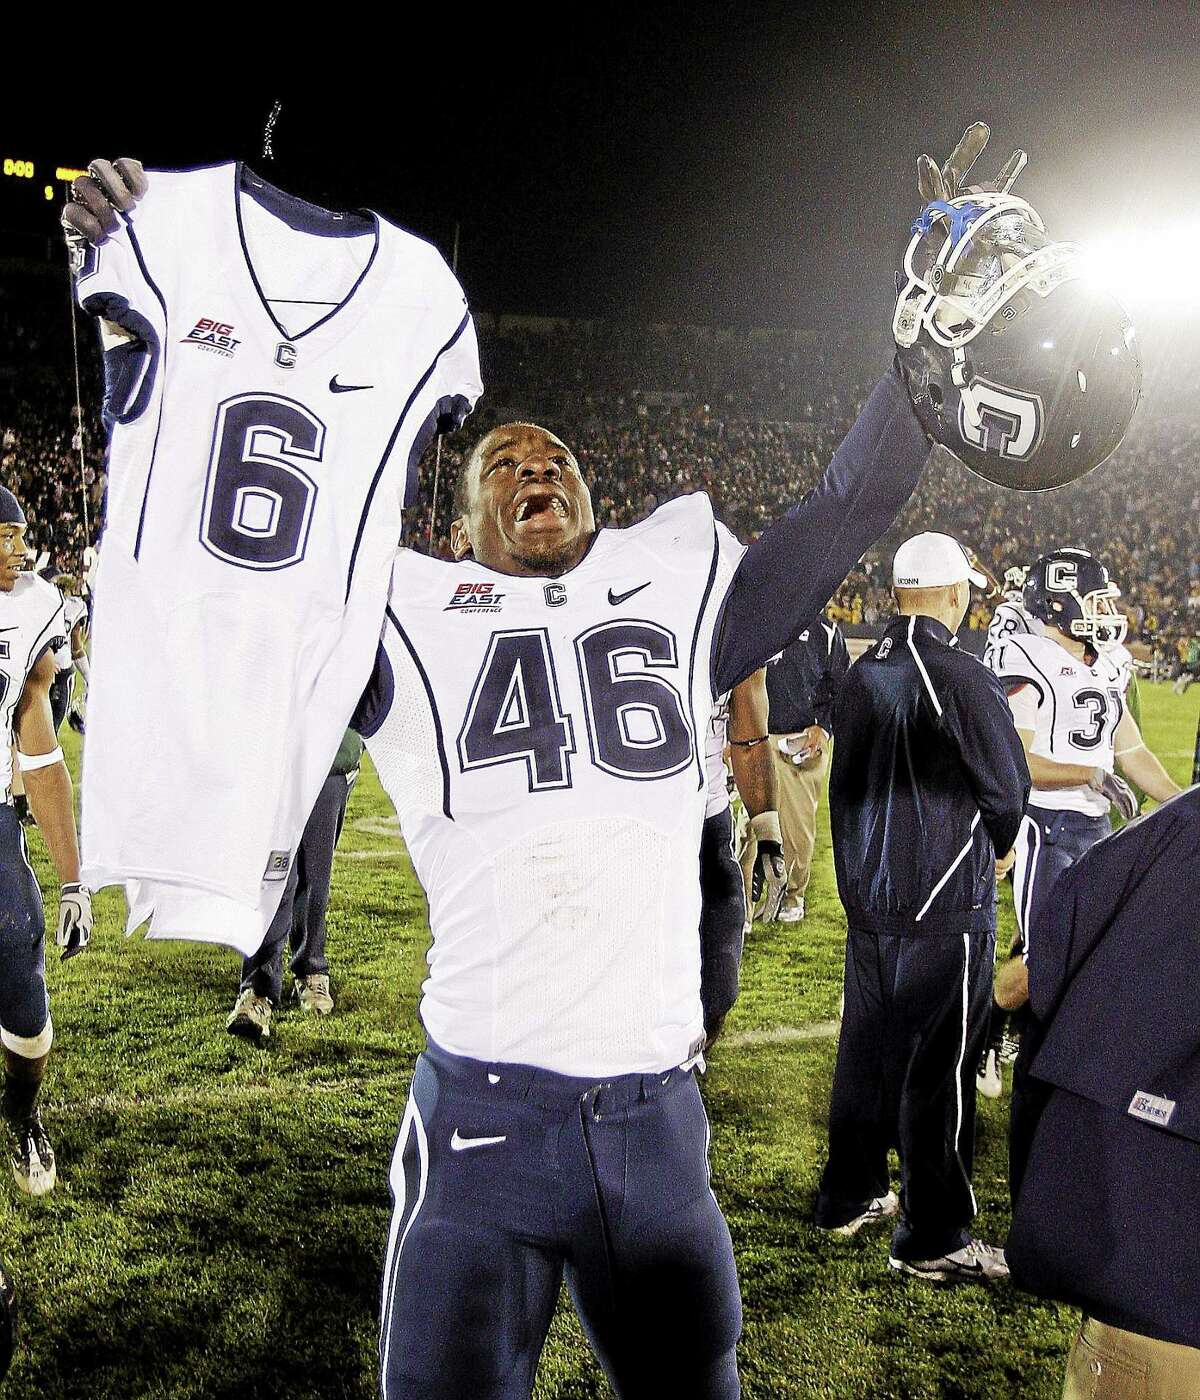 UConn linebacker Sio Moore carries the jersey of Jasper Howard after the Huskies defeated Notre Dame 33-30 in double overtime on Nov. 21, 2009, in South Bend, Ind.